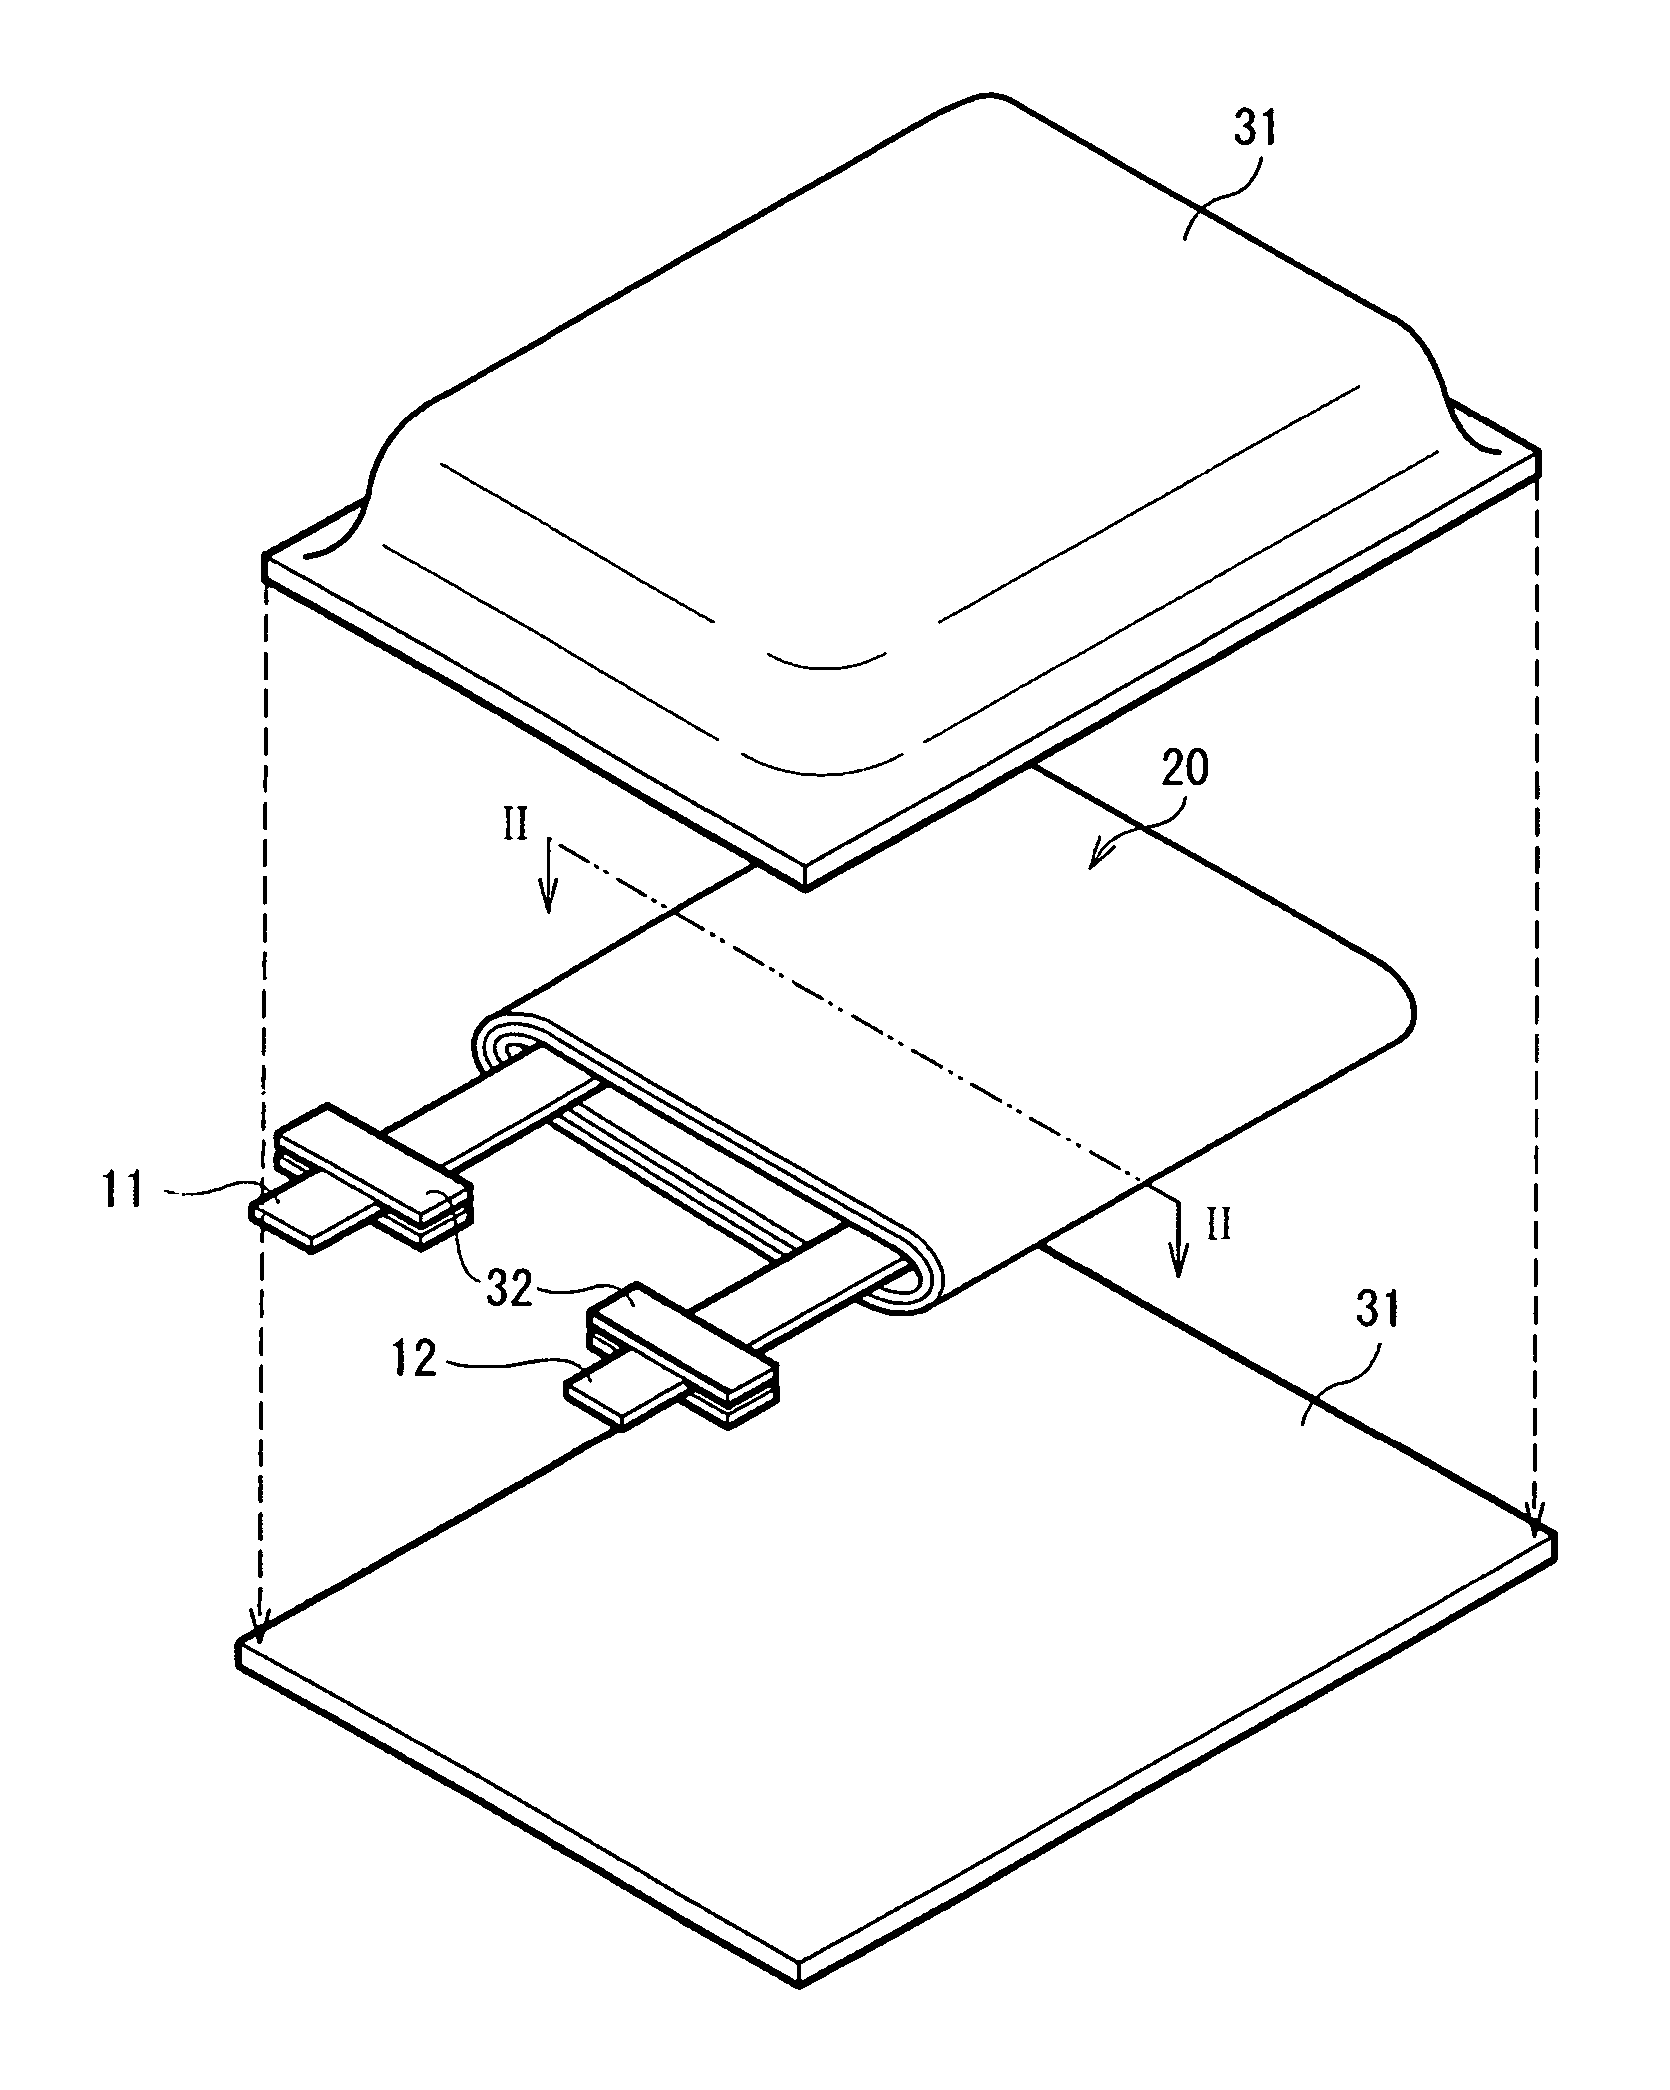 Cathode material and battery